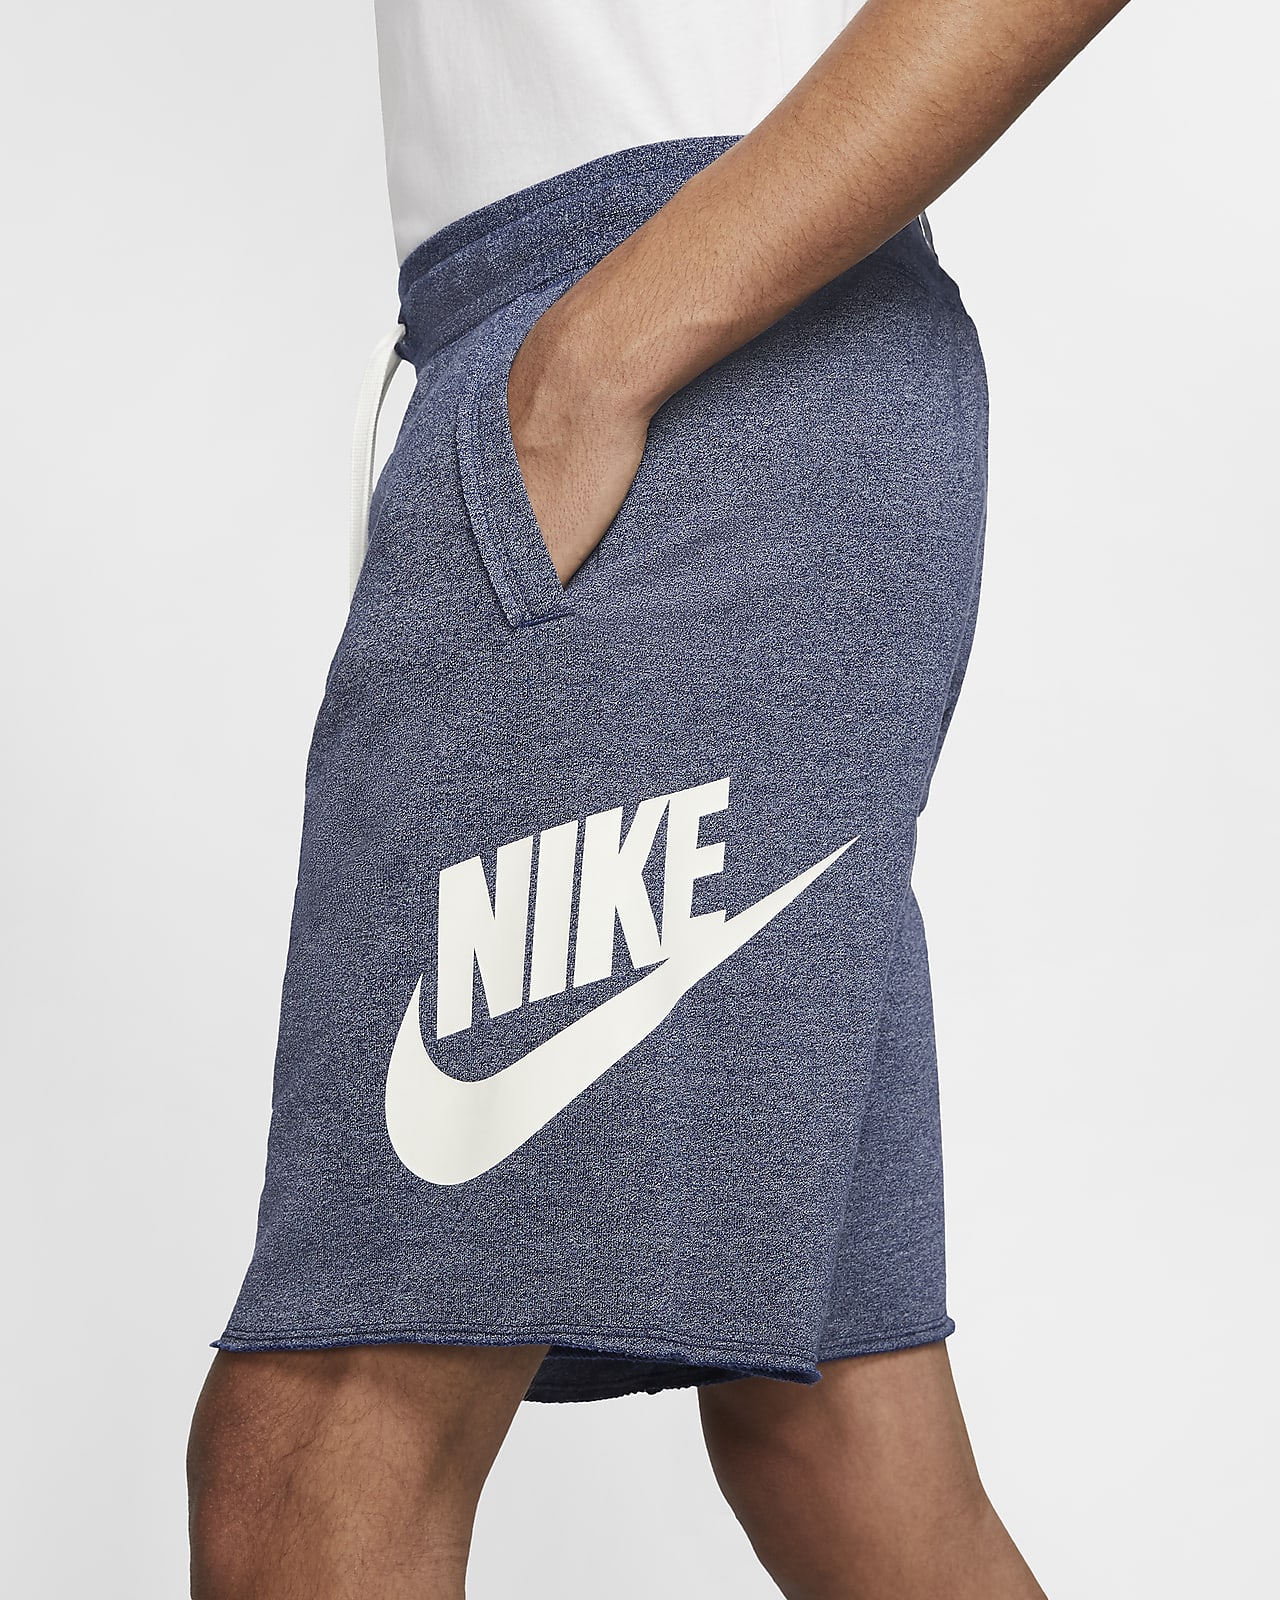 French Terry Shorts. Nike MA